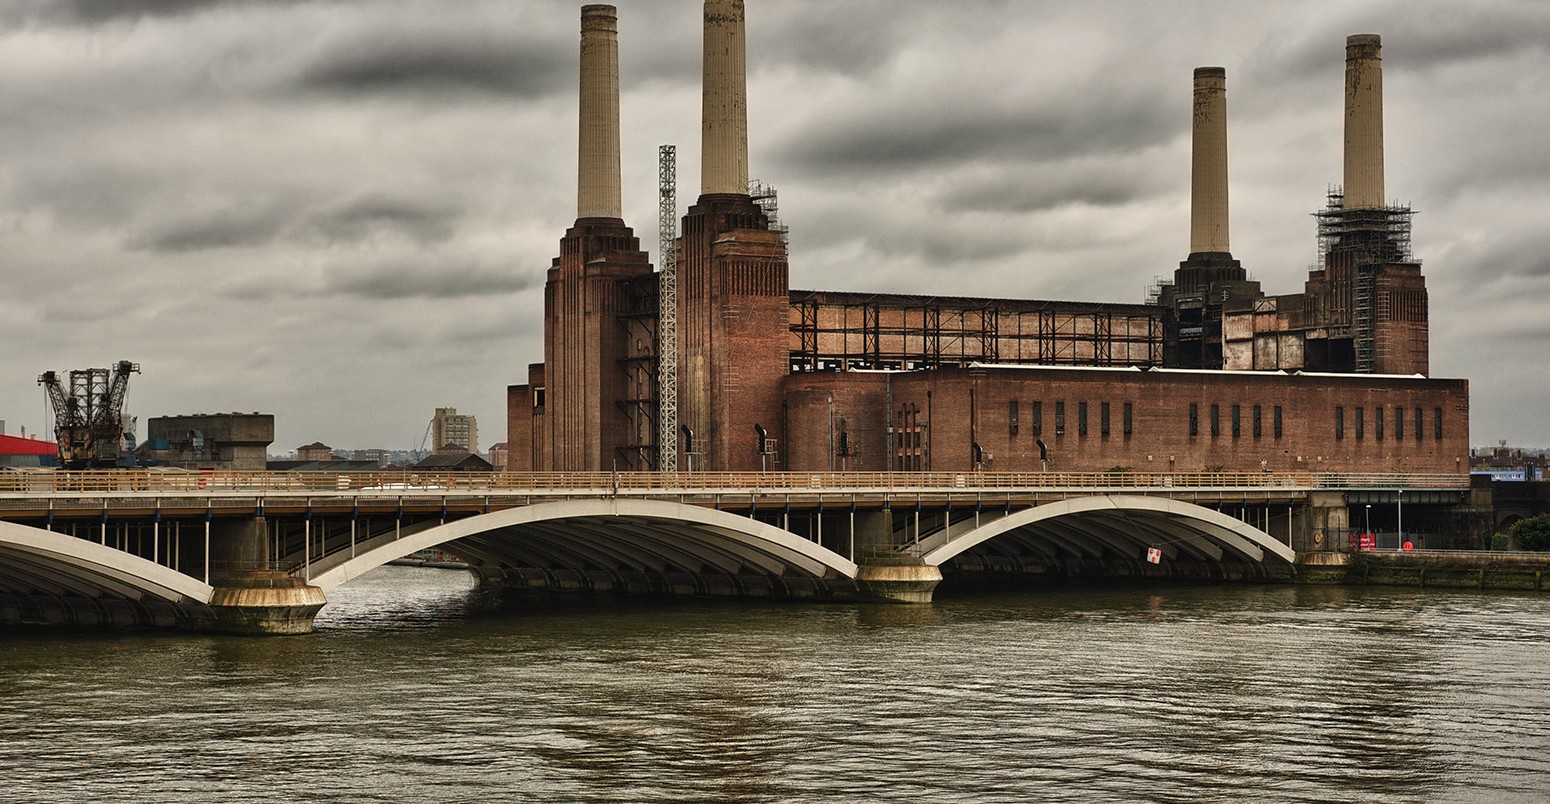 Battersea power station, a former coal-fired power station, UK.